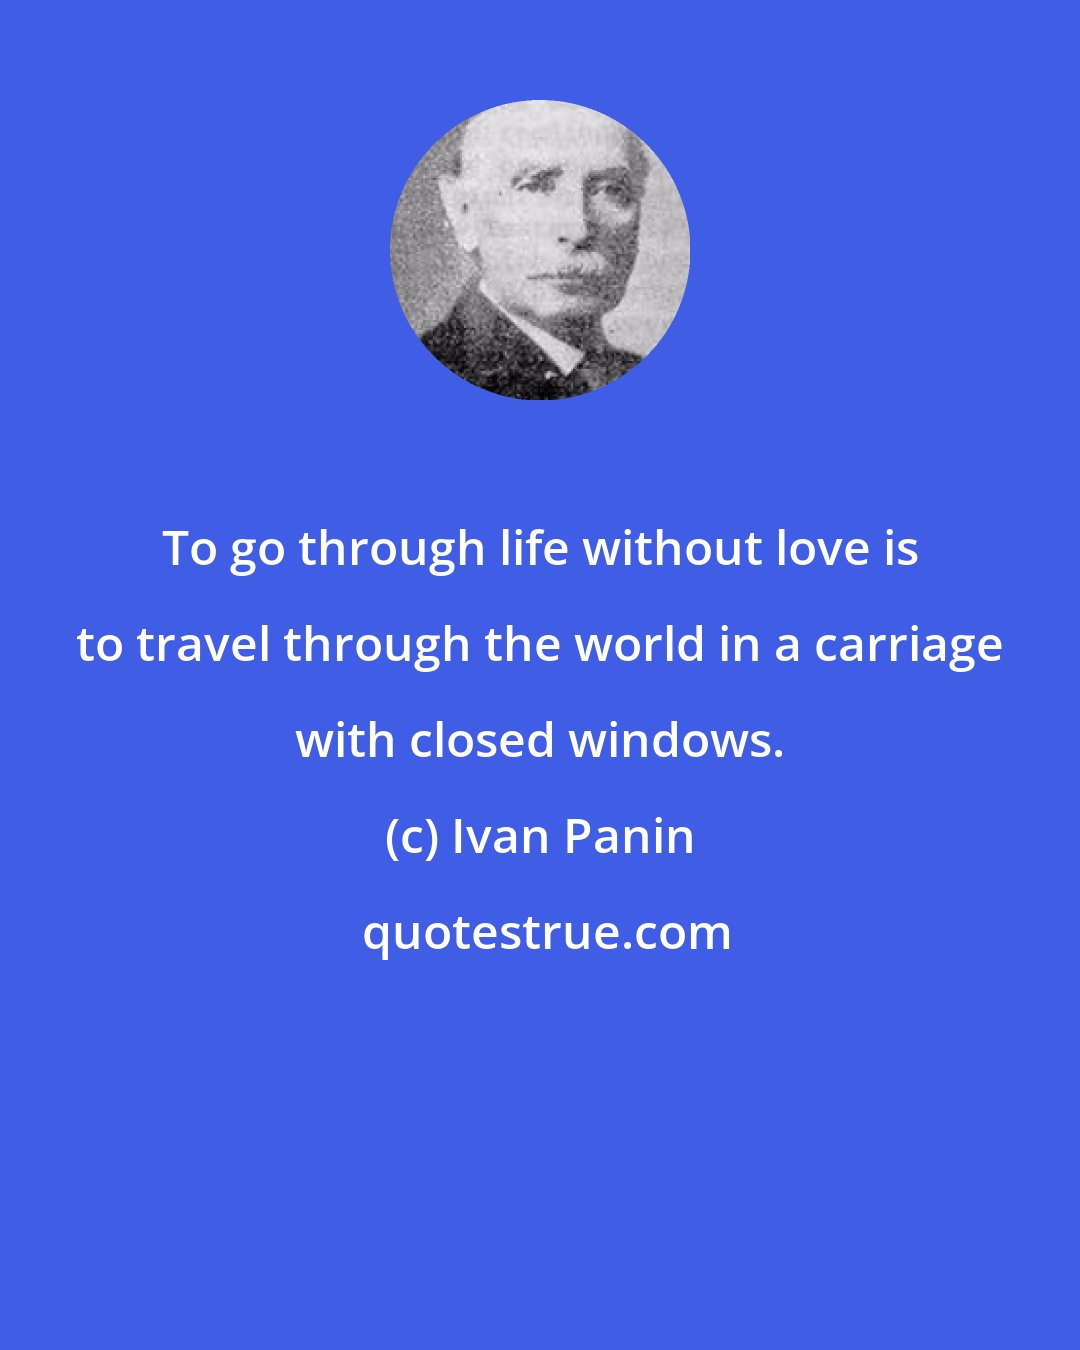 Ivan Panin: To go through life without love is to travel through the world in a carriage with closed windows.